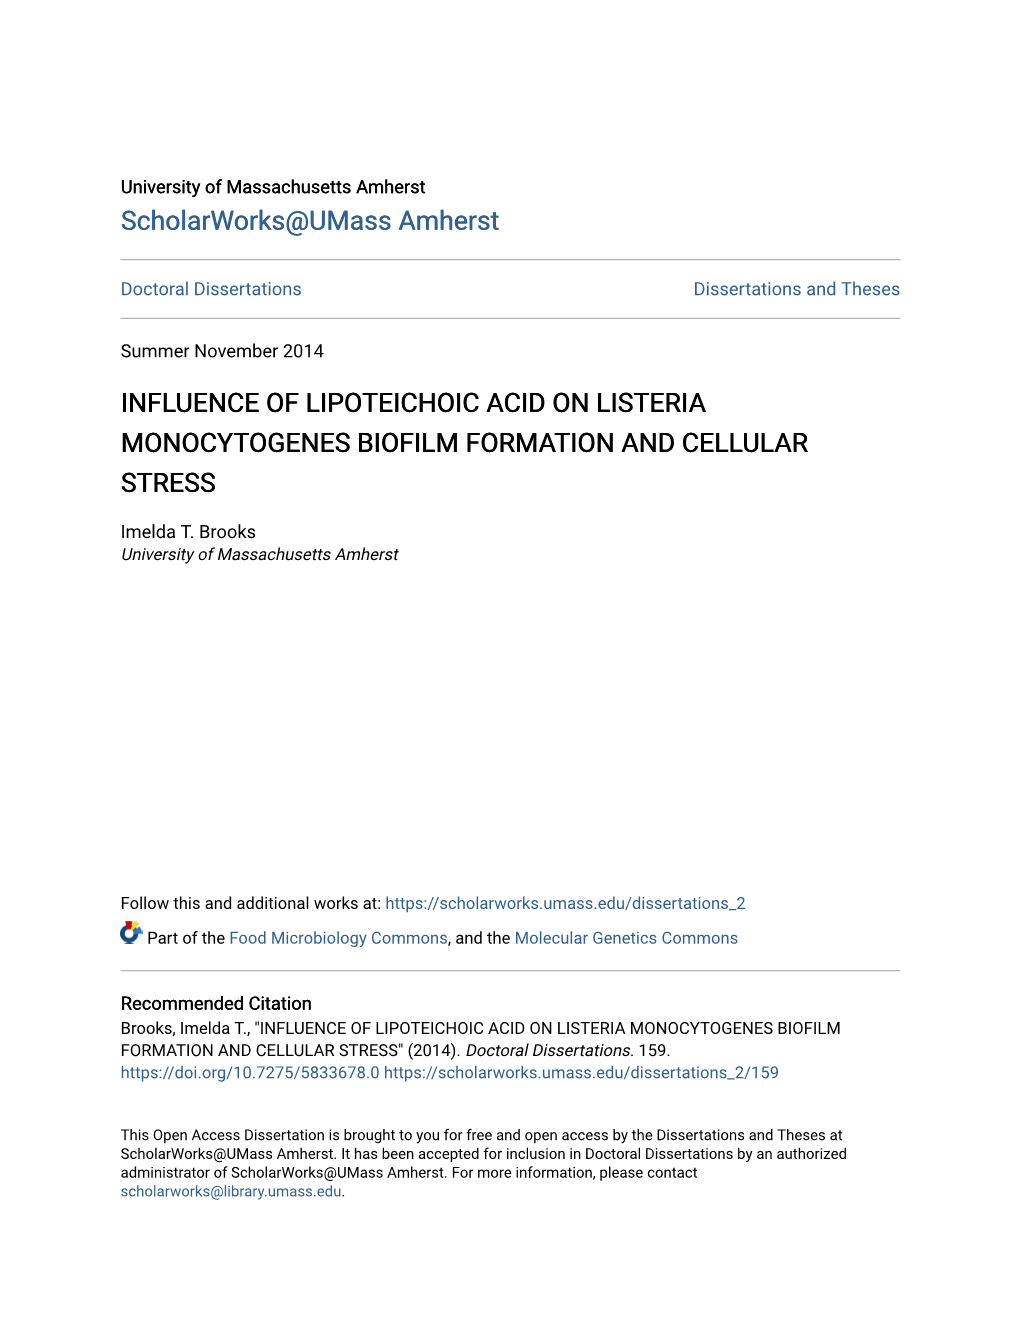 Influence of Lipoteichoic Acid on Listeria Monocytogenes Biofilm Formation and Cellular Stress